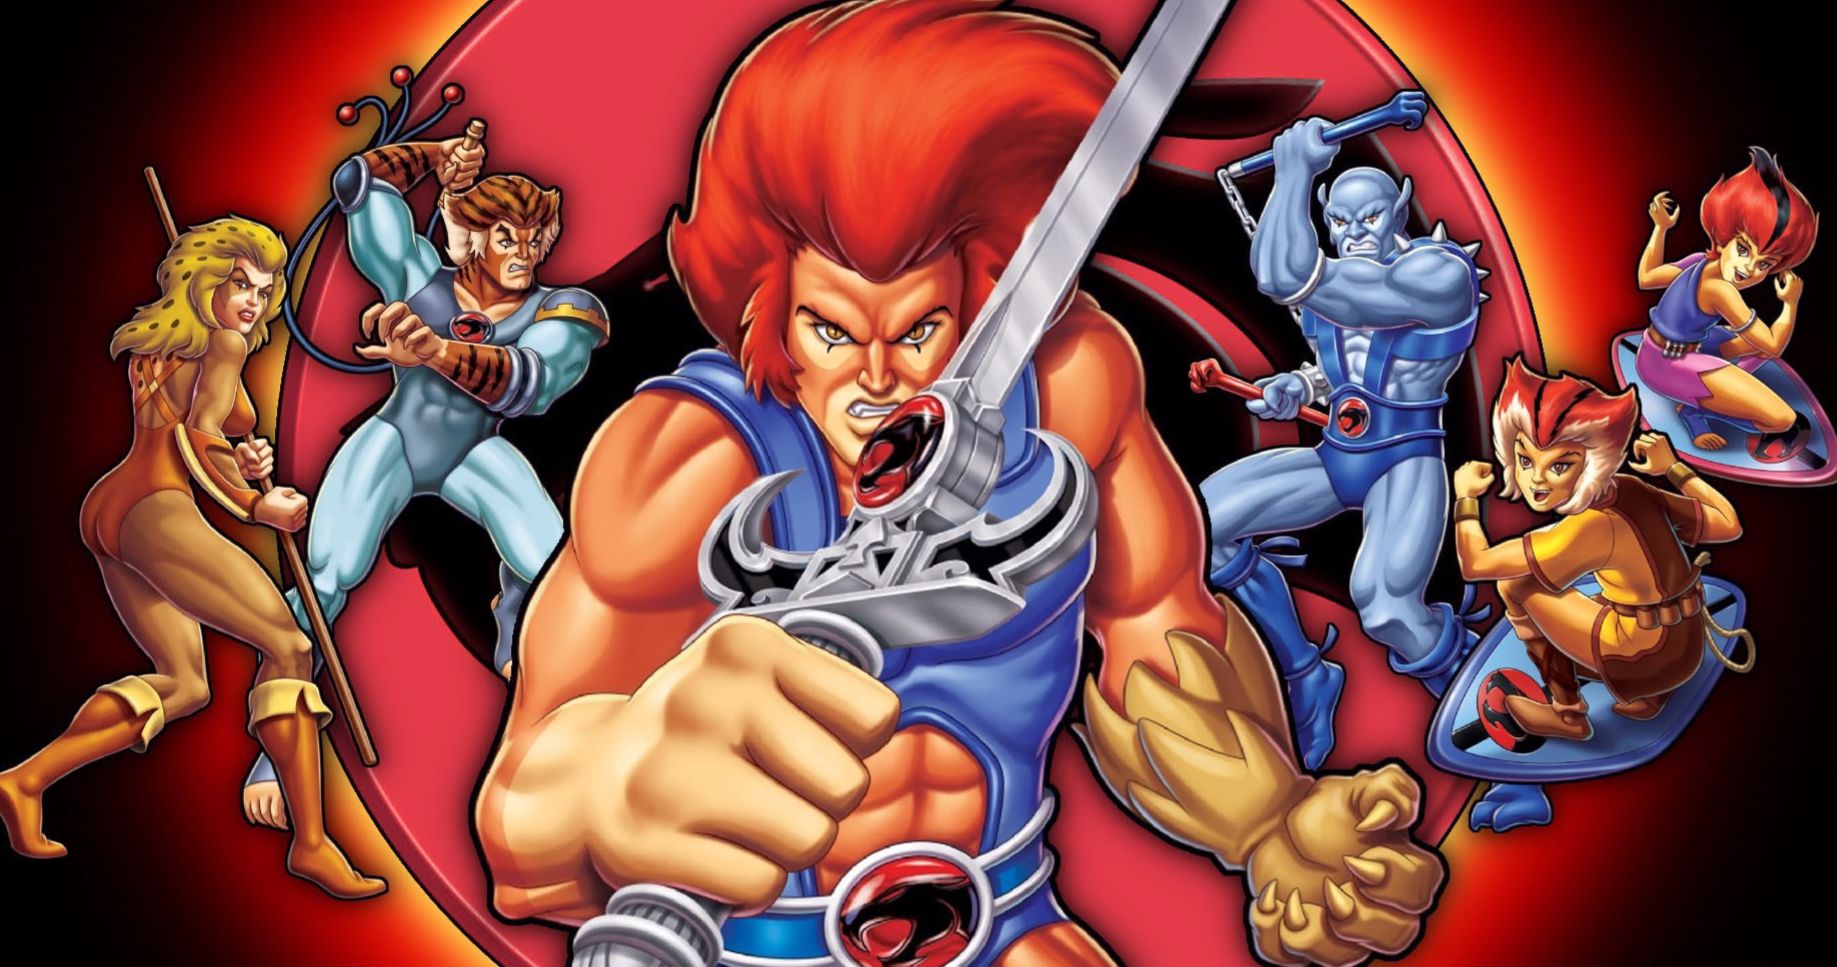 Original Thundercats Cartoon and 2011 Reboot Are Now Streaming on Hulu